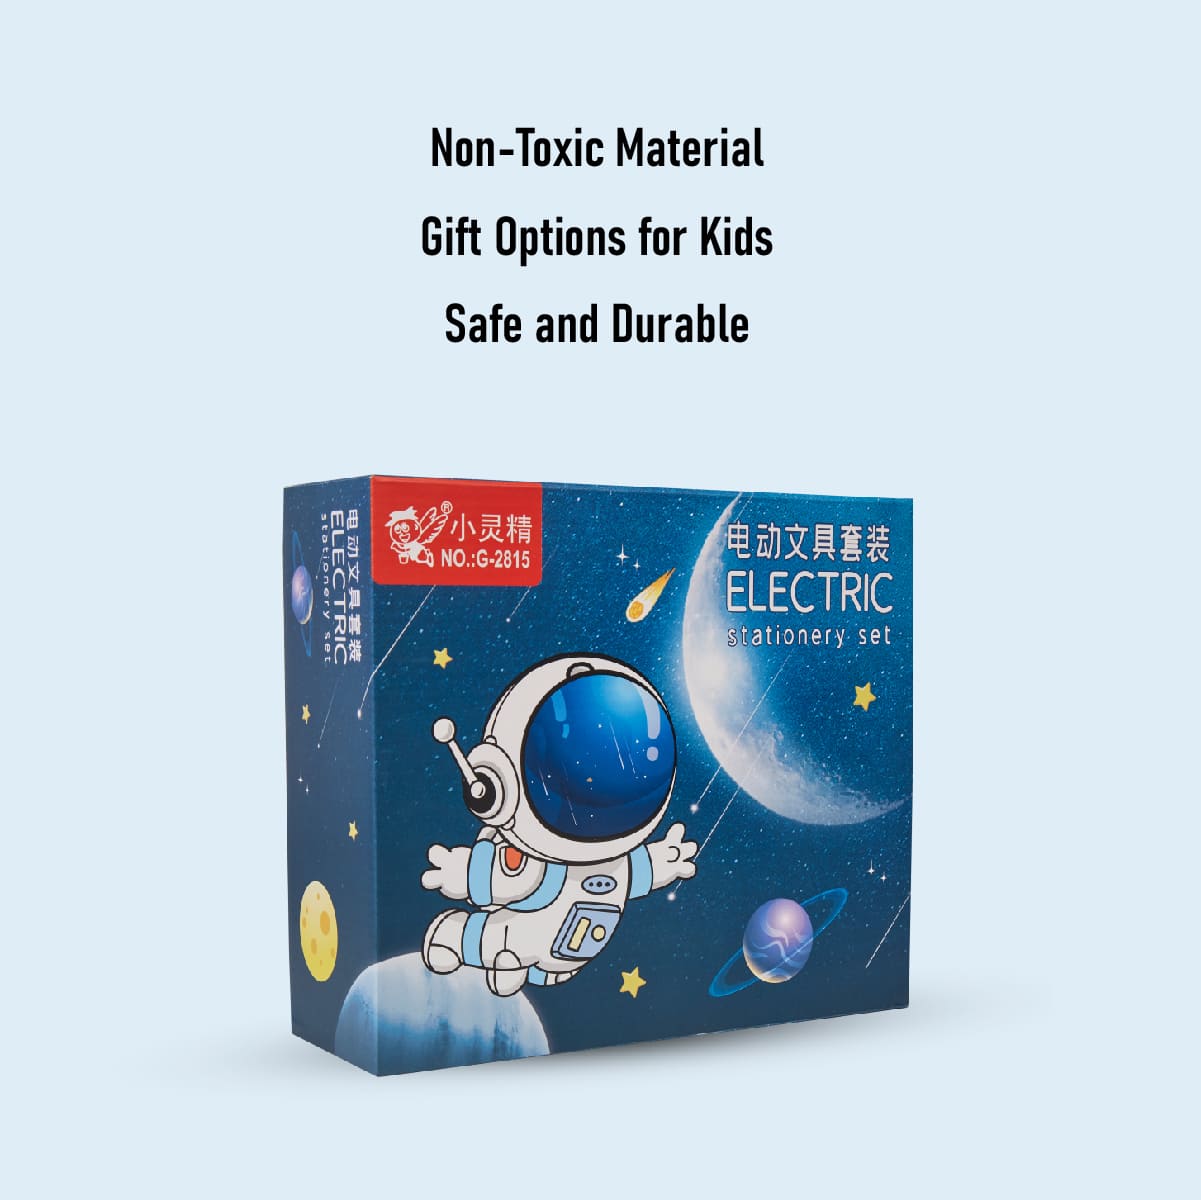 ElectraWrite: Electric Stationery Gift Set - Space